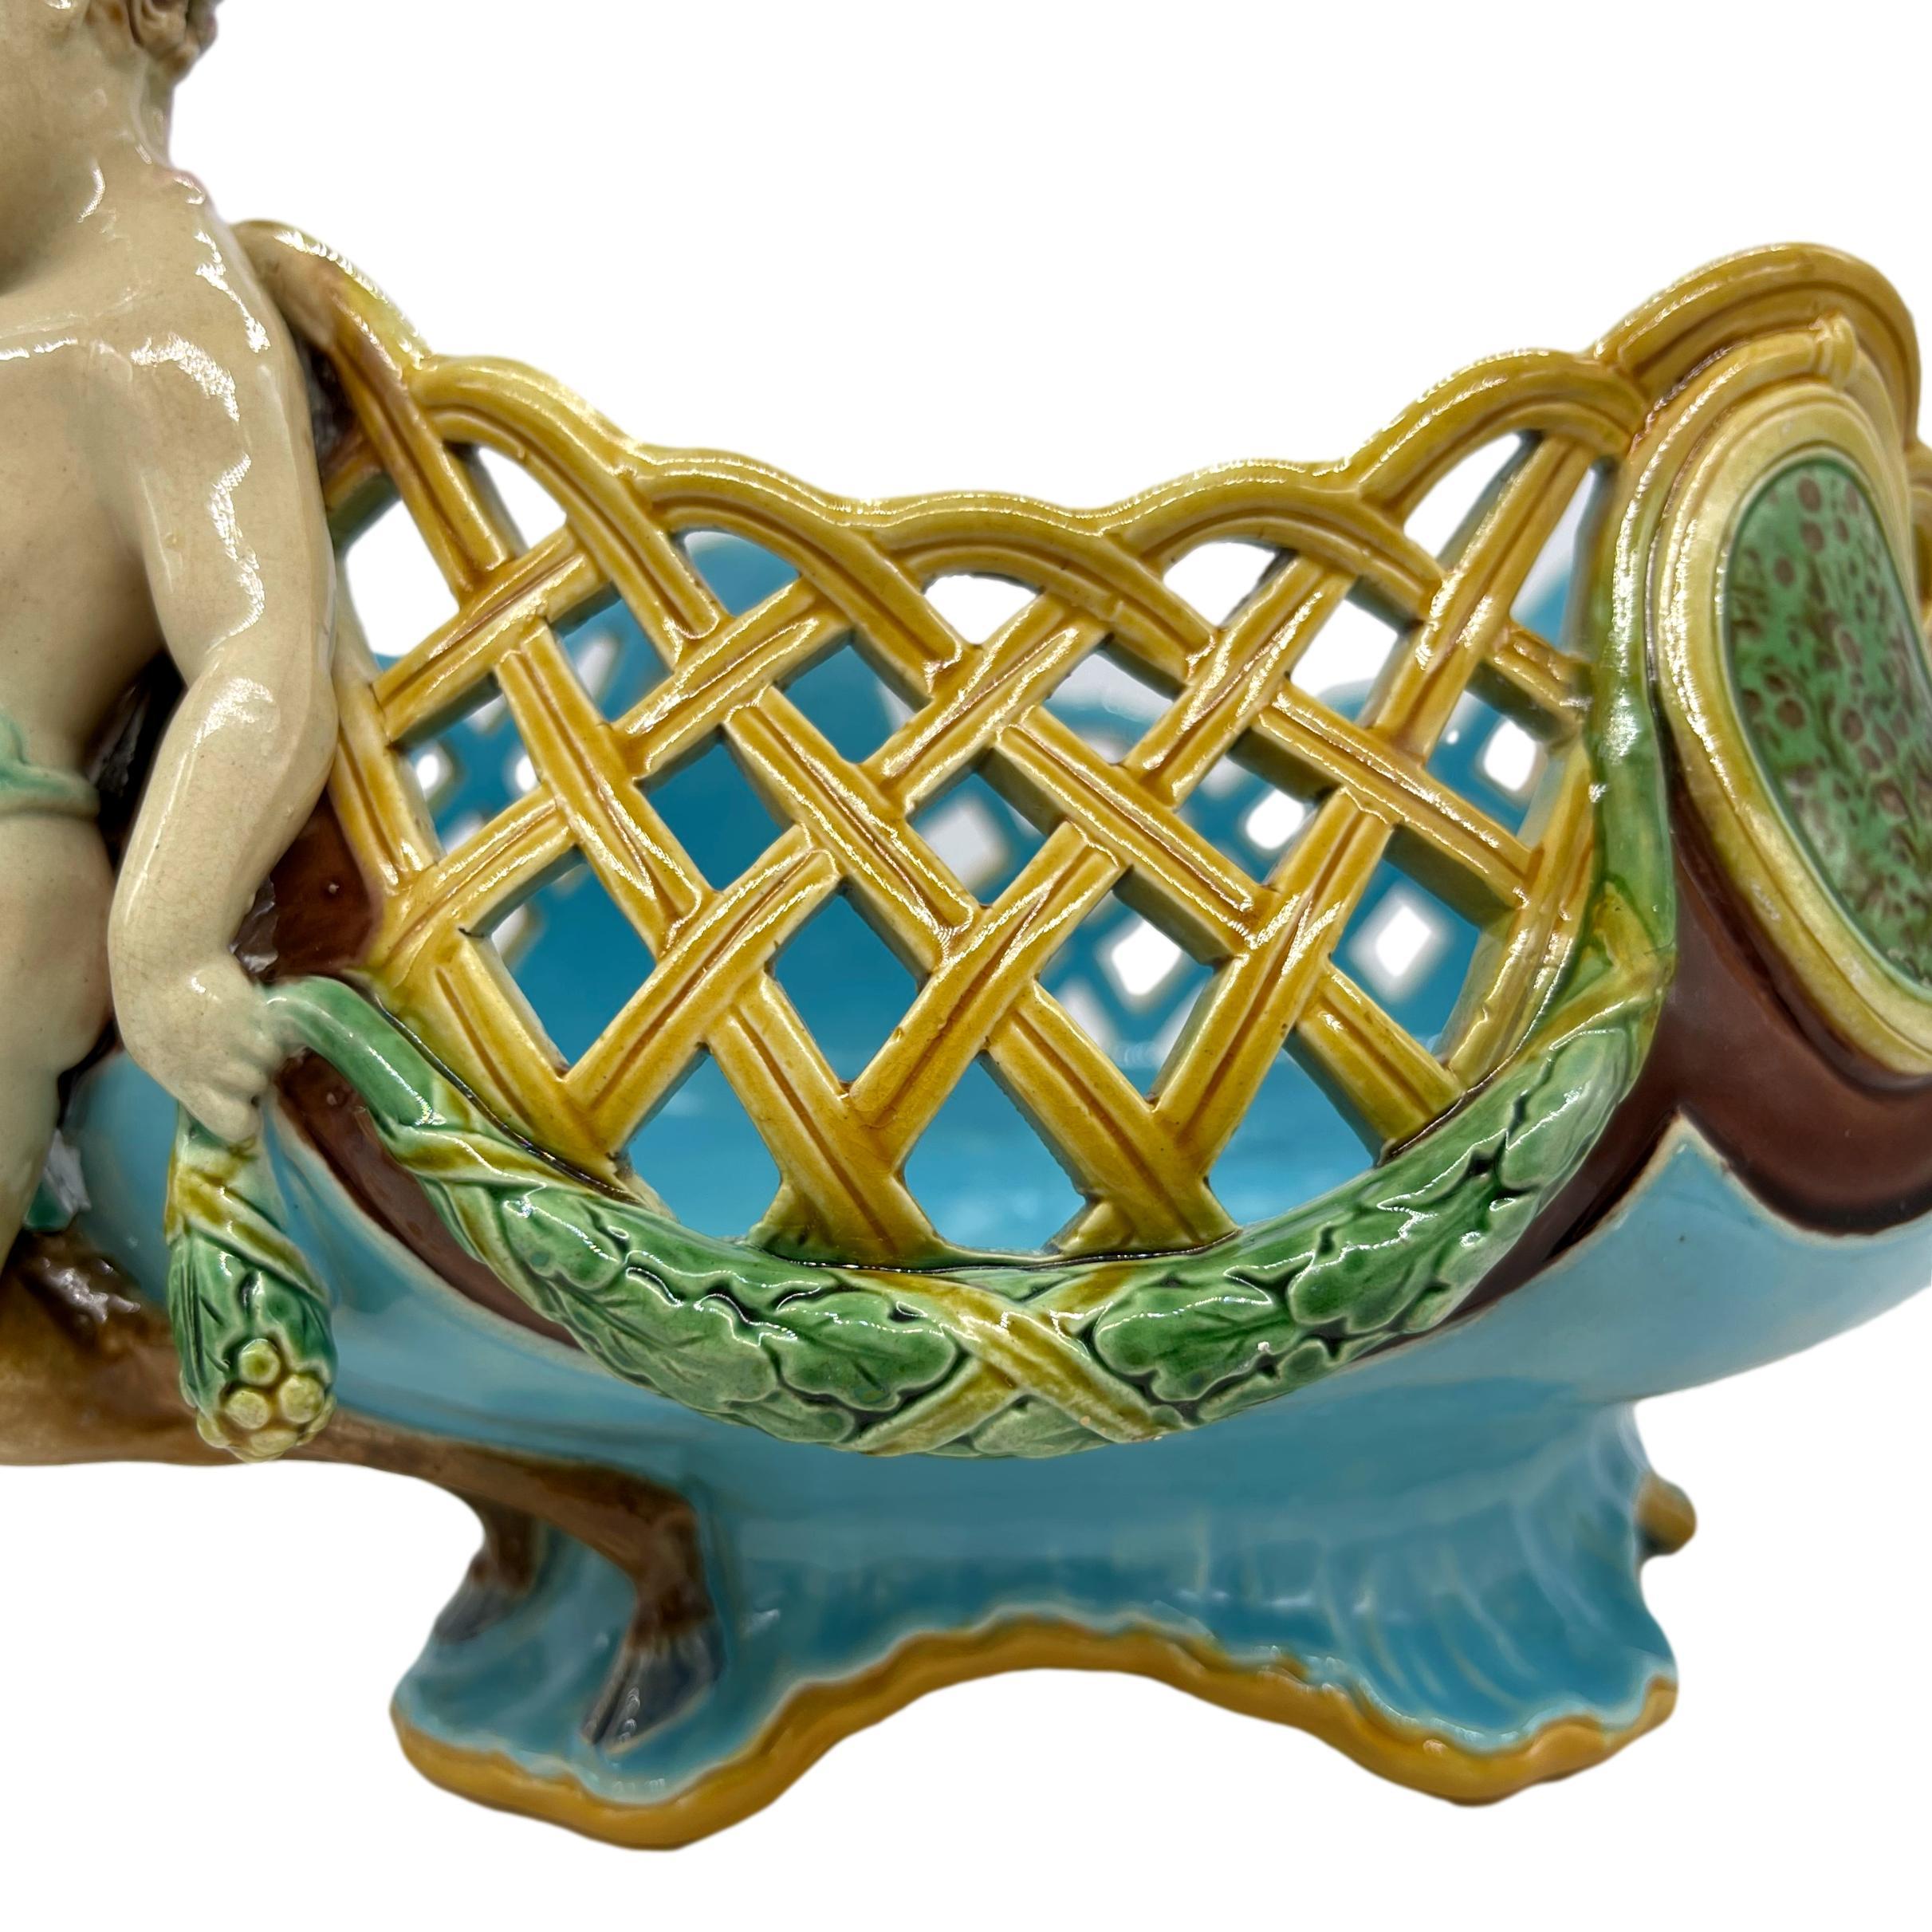 English Minton Majolica Faun Reticulated Basket by A. Carrier-Belleuse, Dated 1871